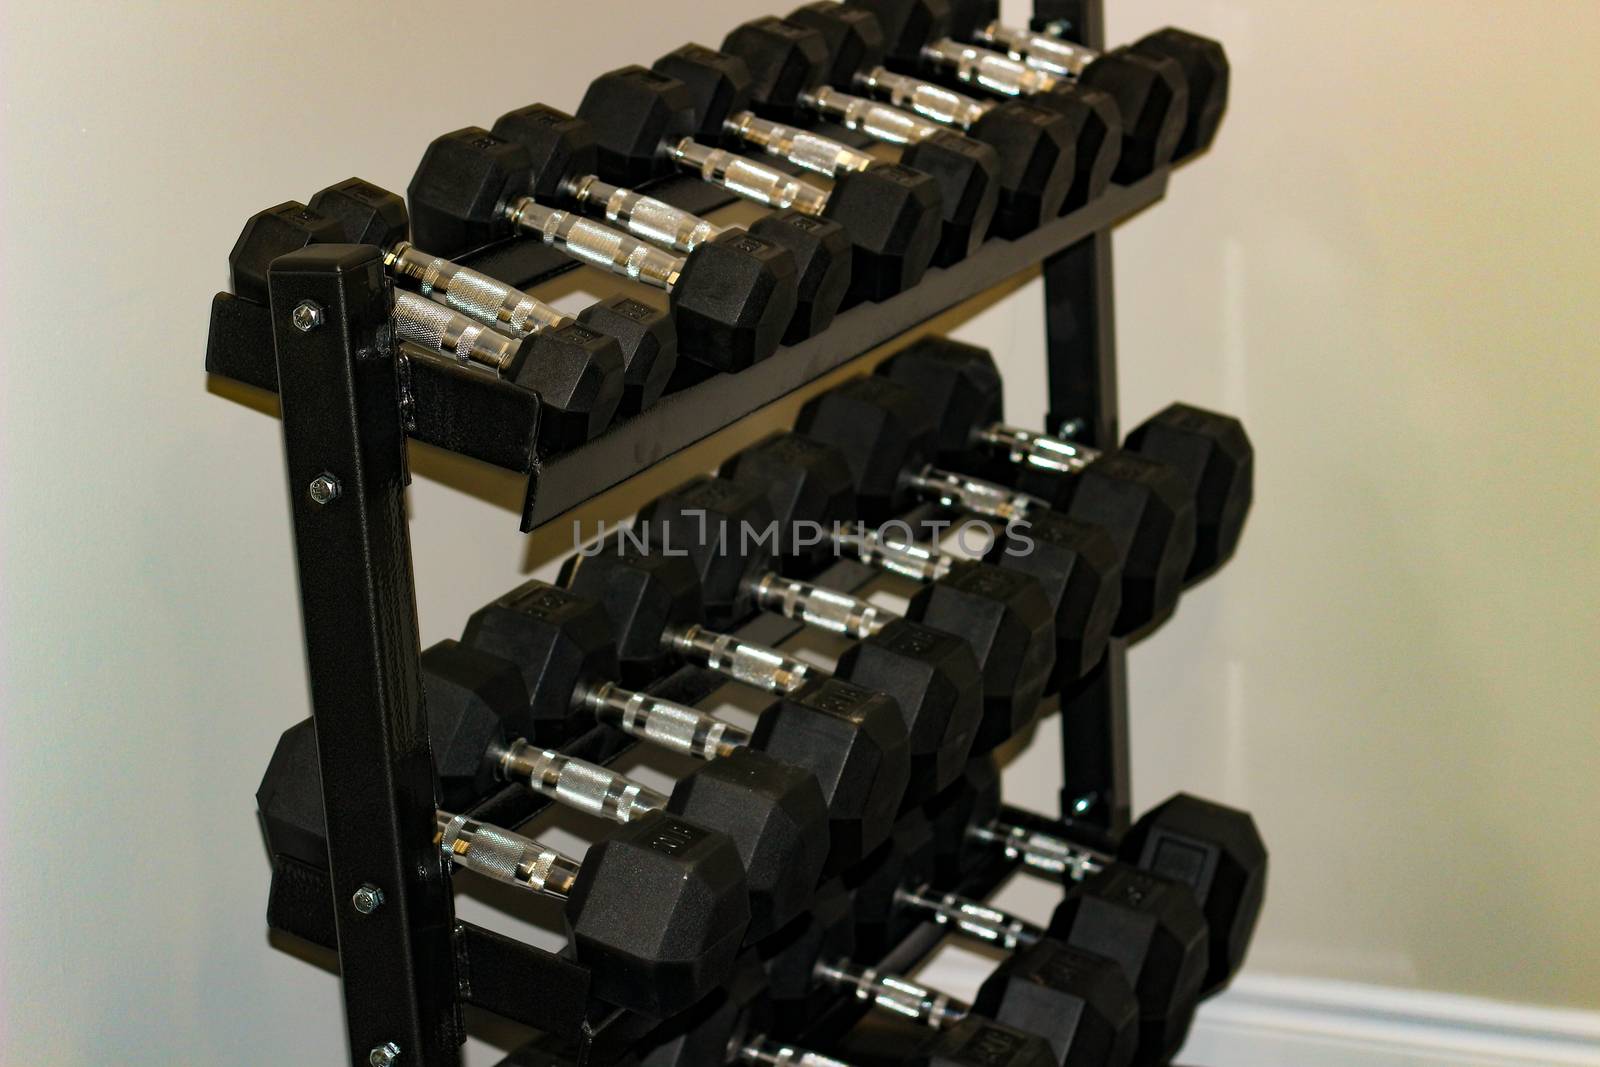 Every size of dumbbell on its rack in a fitness room. Is provided for customers, villagers or livers practice weight training exercise for their muscle strength by mynewturtle1